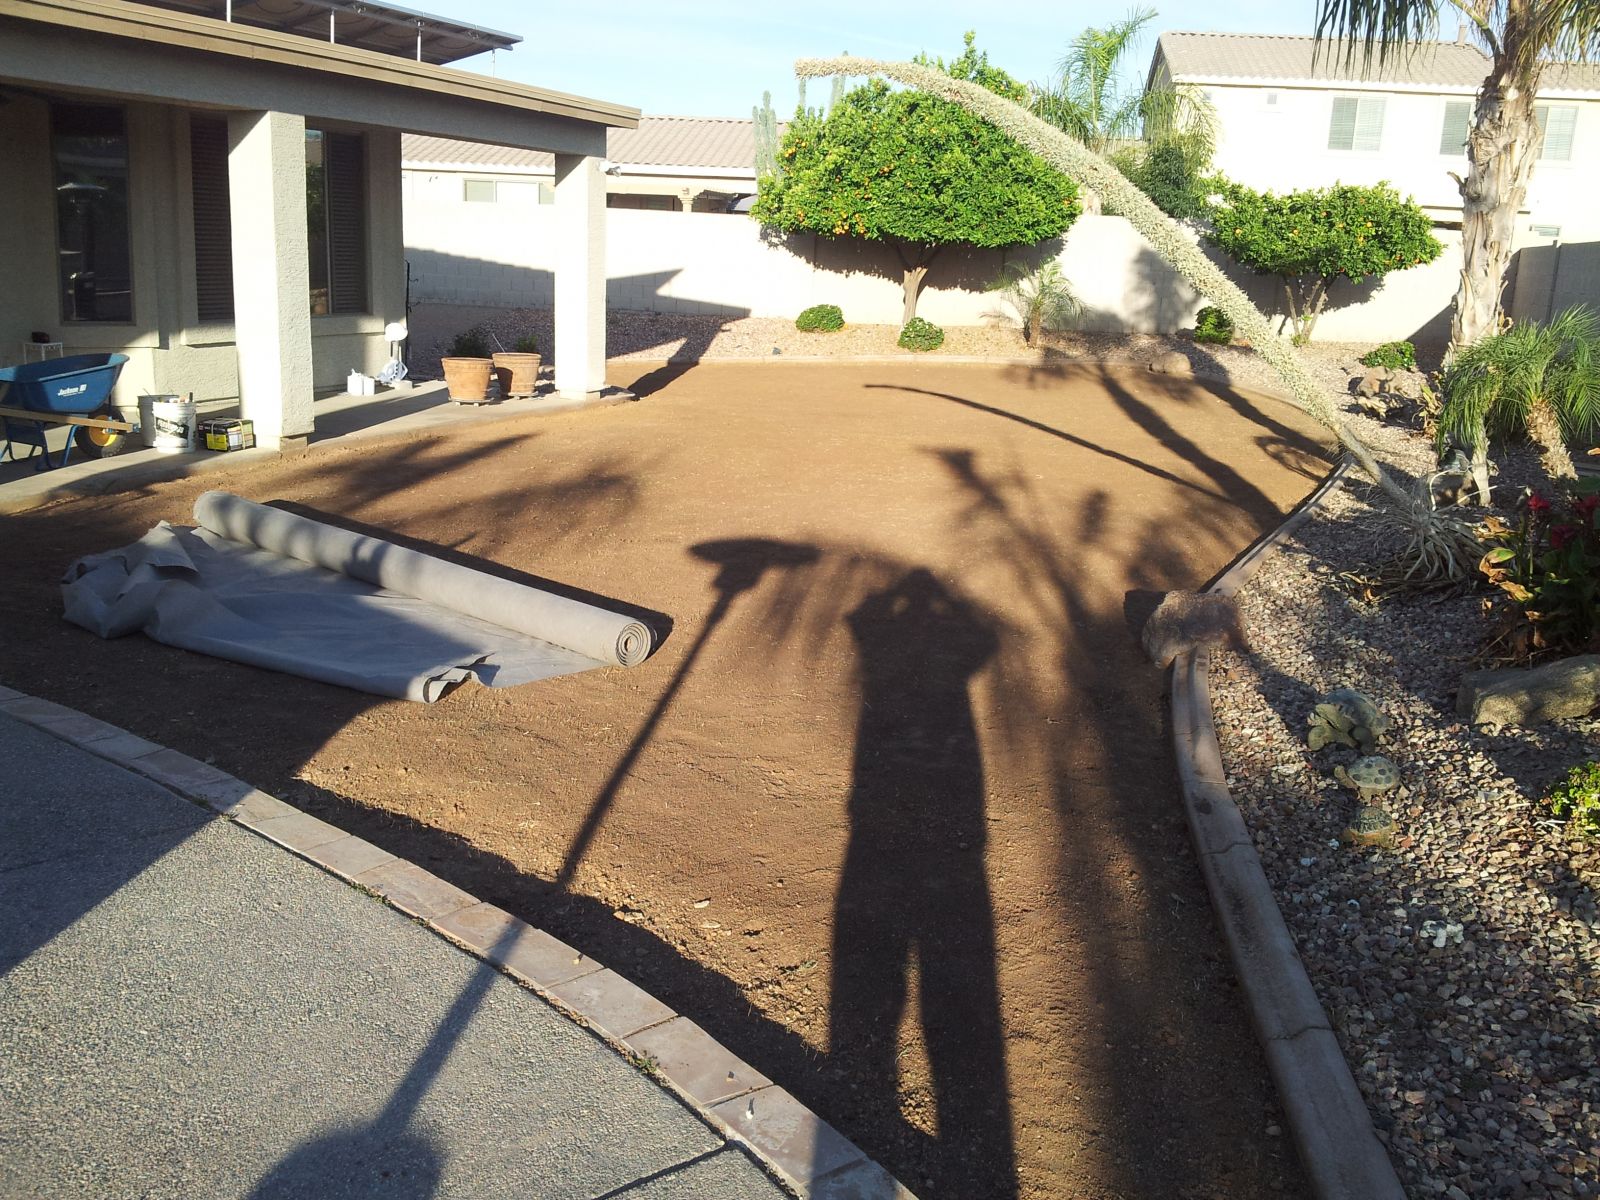 Where To Get A Premium Artificial Turf Installation in Queen Creek?